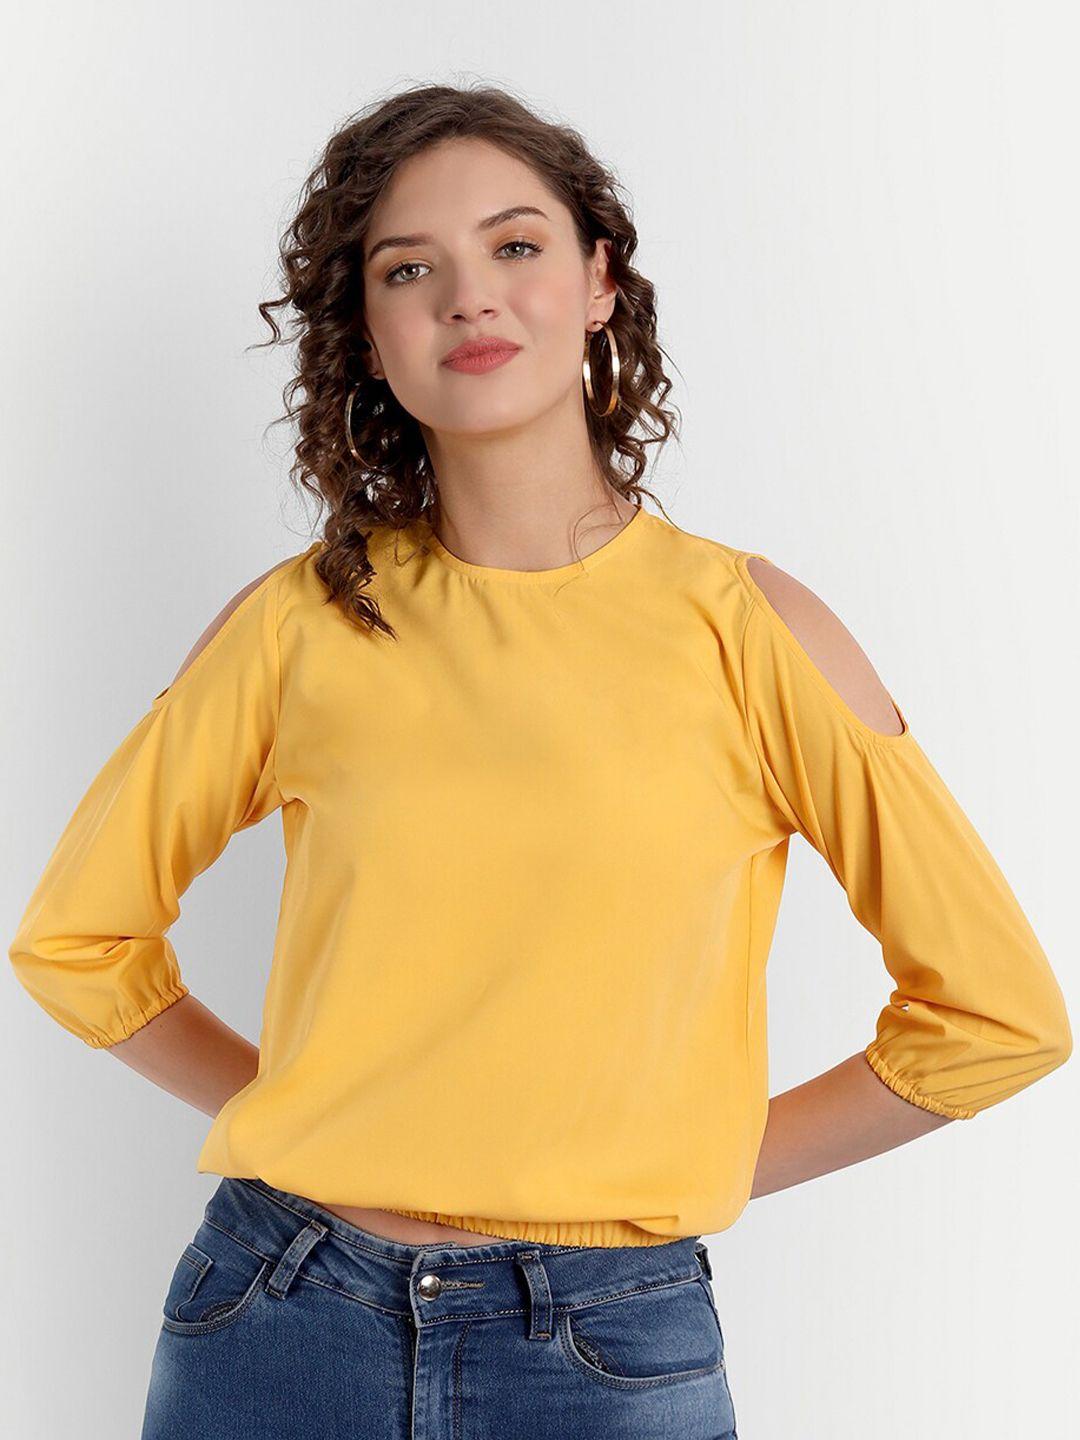 parassio-clothings-yellow-georgette-top